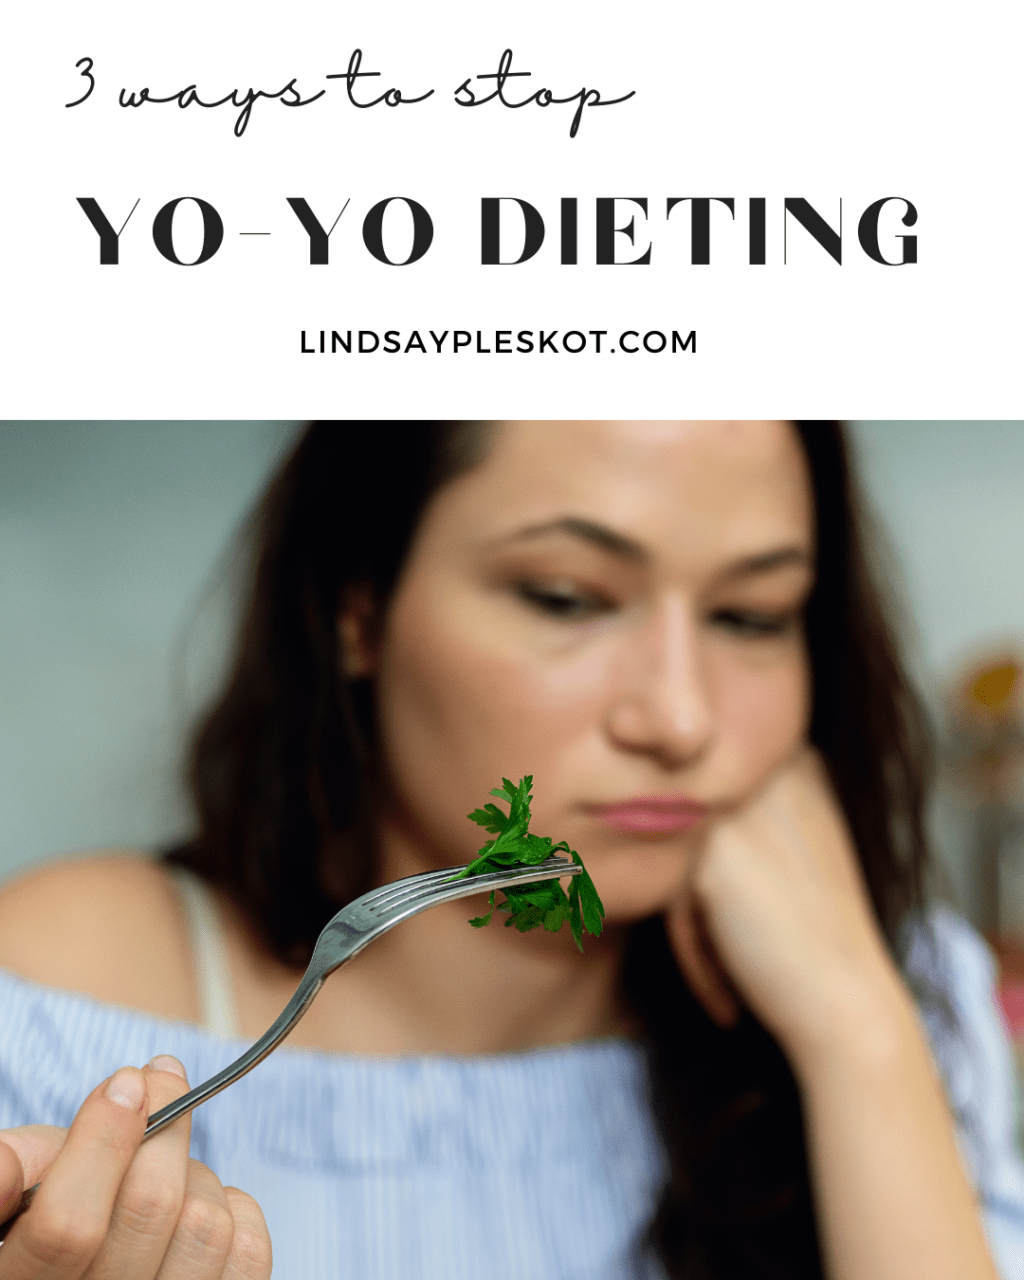 a girl in a blue shirt is looking miserably at a fork with very few green leaves on it. The picture conveys someone who is hungry and on a diet. The test reads 3 ways to stop yoyo dieting.